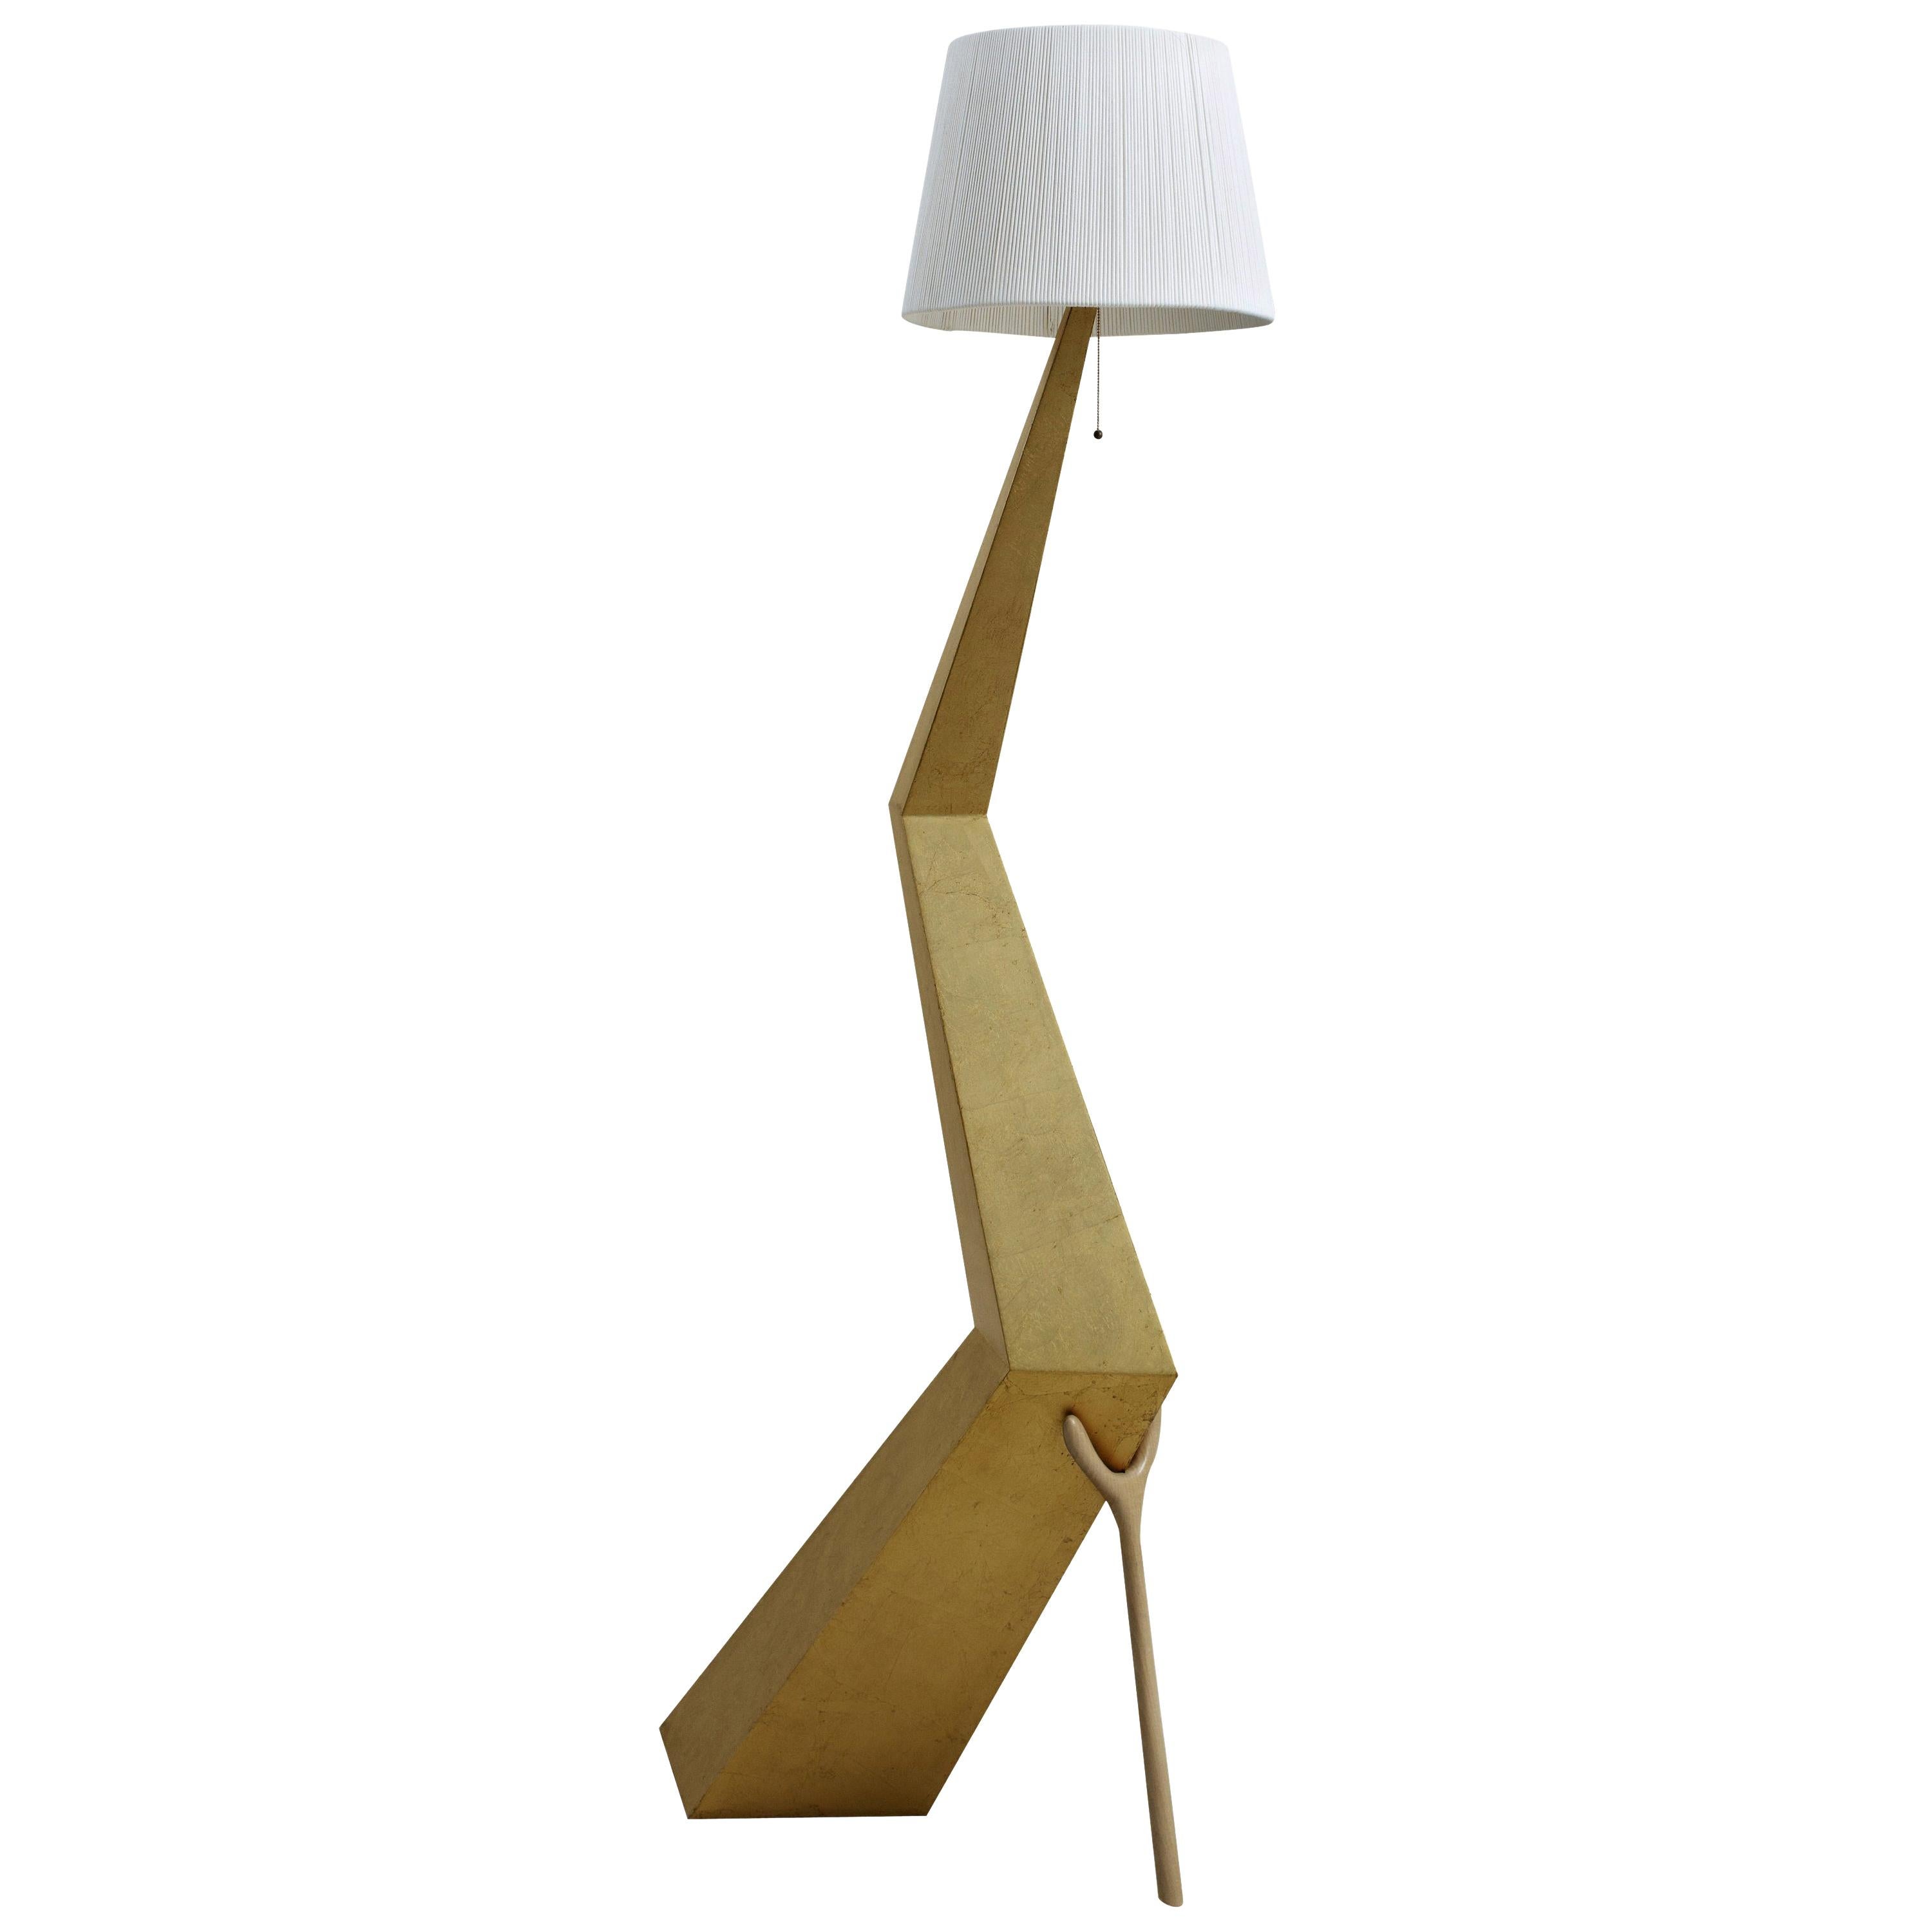 Braceli lamp designed by Salvador Dali manufactured by BD furniture in Barcelona.

Bracelli
Panel structure covered with silver plated polyester painting (Fine gold leaf).
Lampshade in ivory cotton and rayon. 

Measures: 37 x 64 x 180 H.